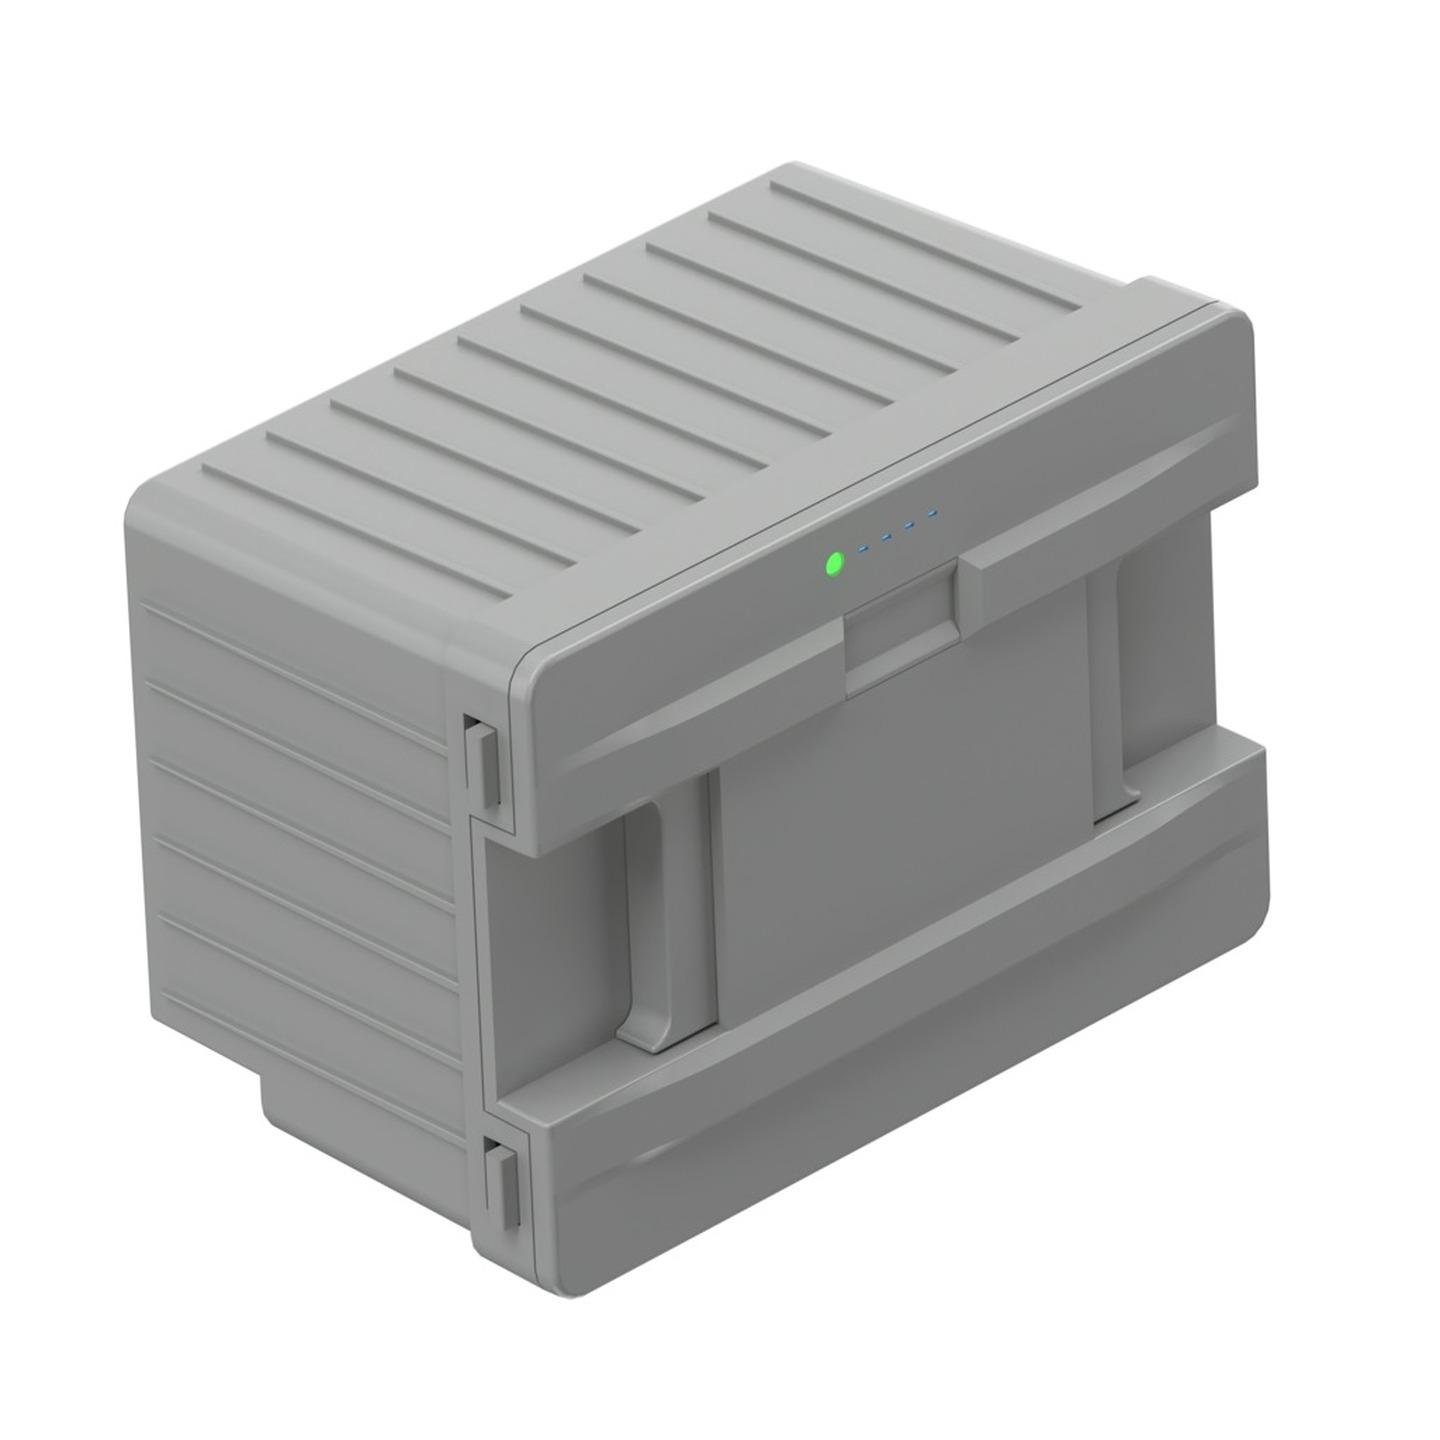 5.2Ah Removable Lithium Battery to Suit Brass Monkey Fridge/Freezers with Battery Support